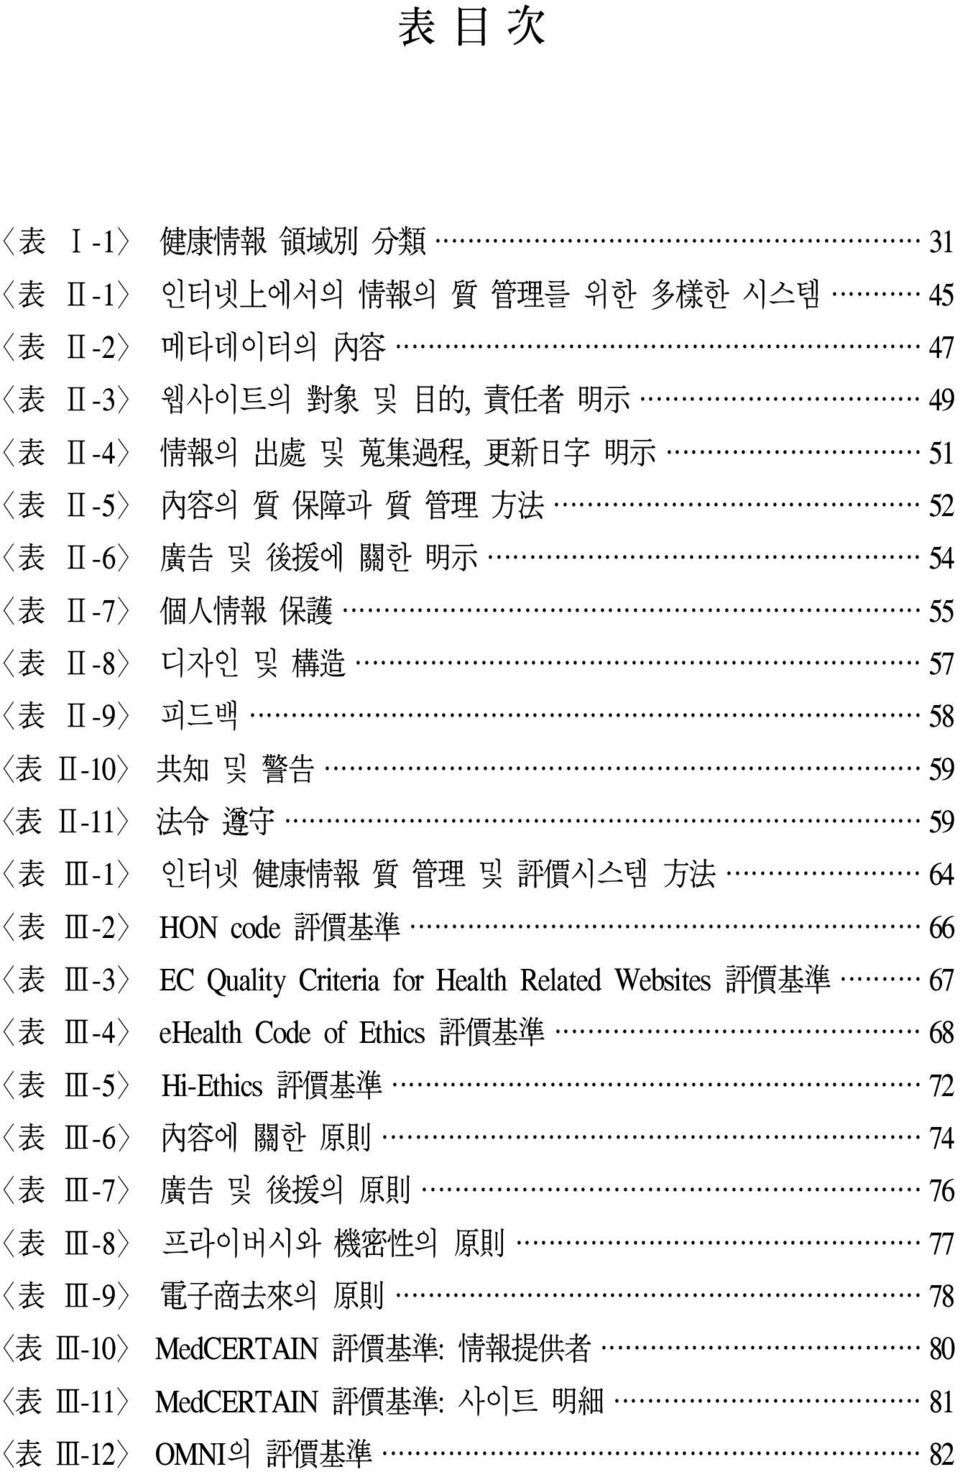 法 64 表 Ⅲ-2 HON code 評 價 基 準 66 表 Ⅲ-3 EC Quality Criteria for Health Related Websites 評 價 基 準 67 表 Ⅲ-4 ehealth Code of Ethics 評 價 基 準 68 表 Ⅲ-5 Hi-Ethics 評 價 基 準 72 表 Ⅲ-6 內 容 에 關 한 原 則